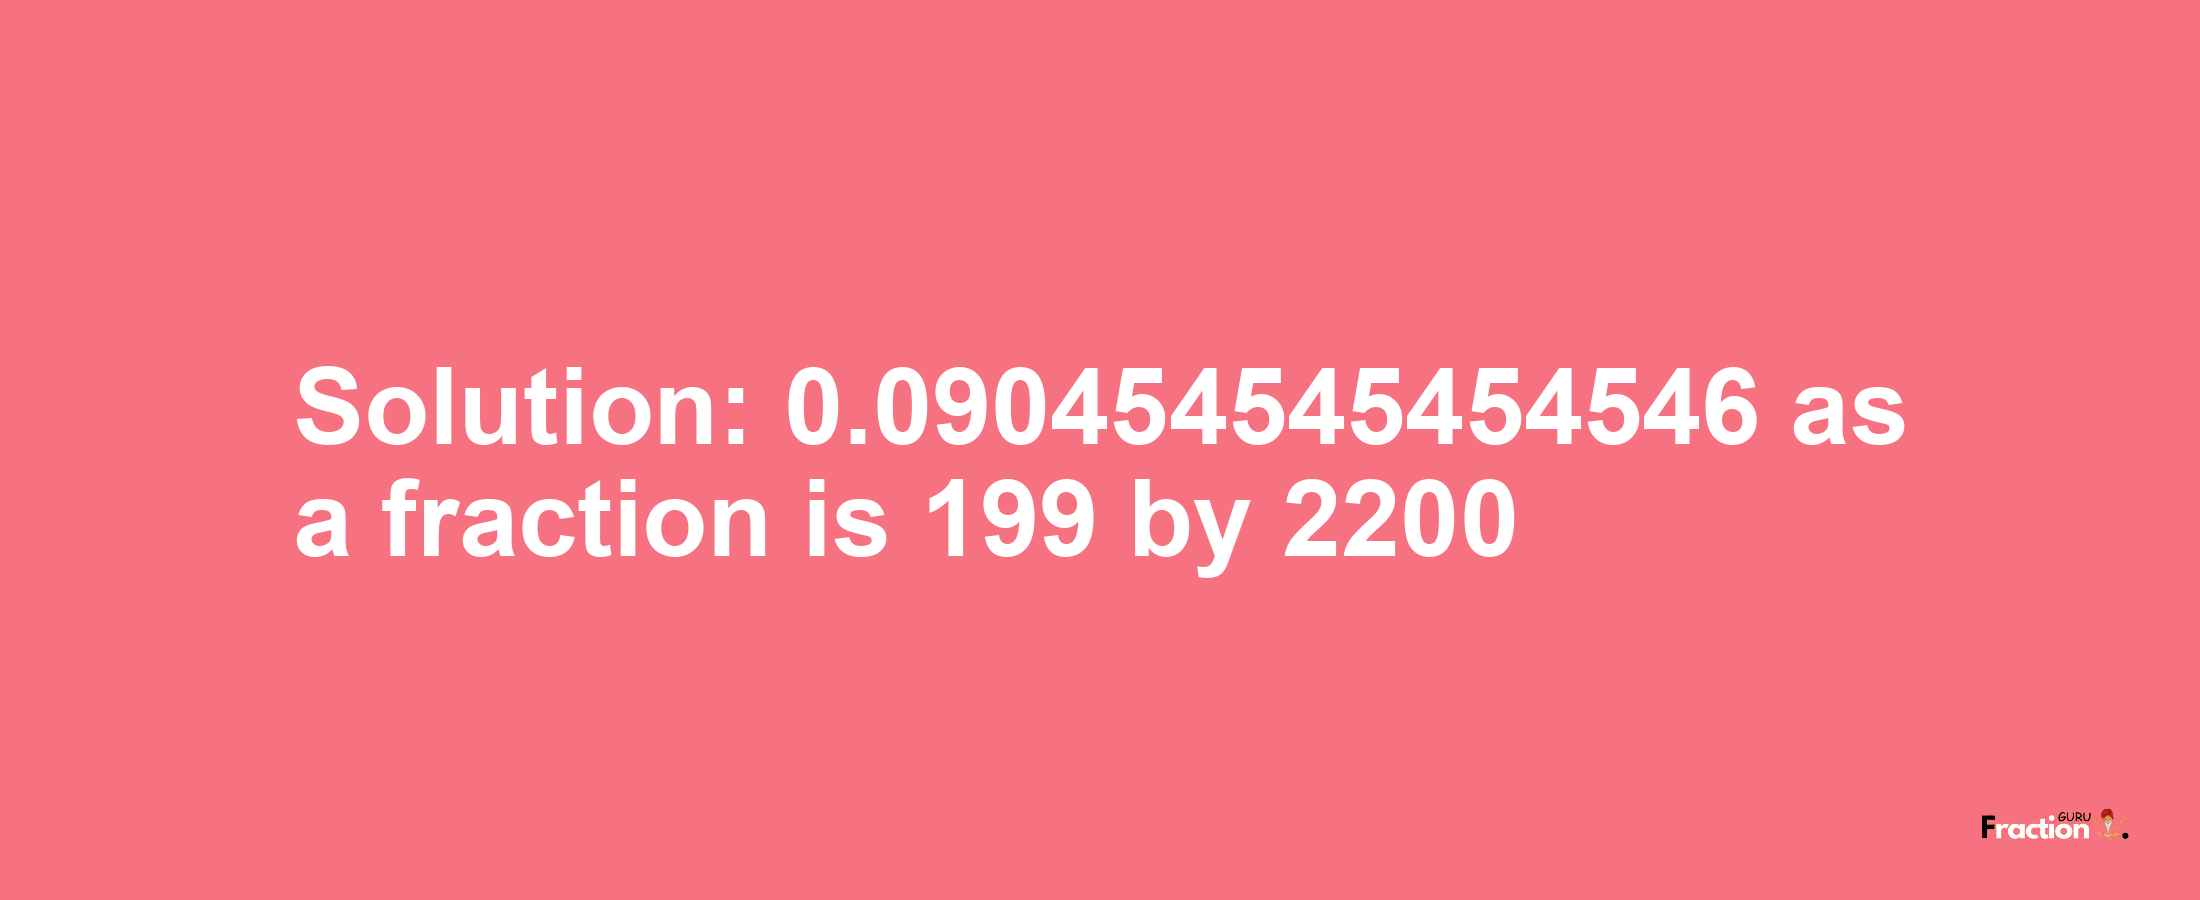 Solution:0.090454545454546 as a fraction is 199/2200